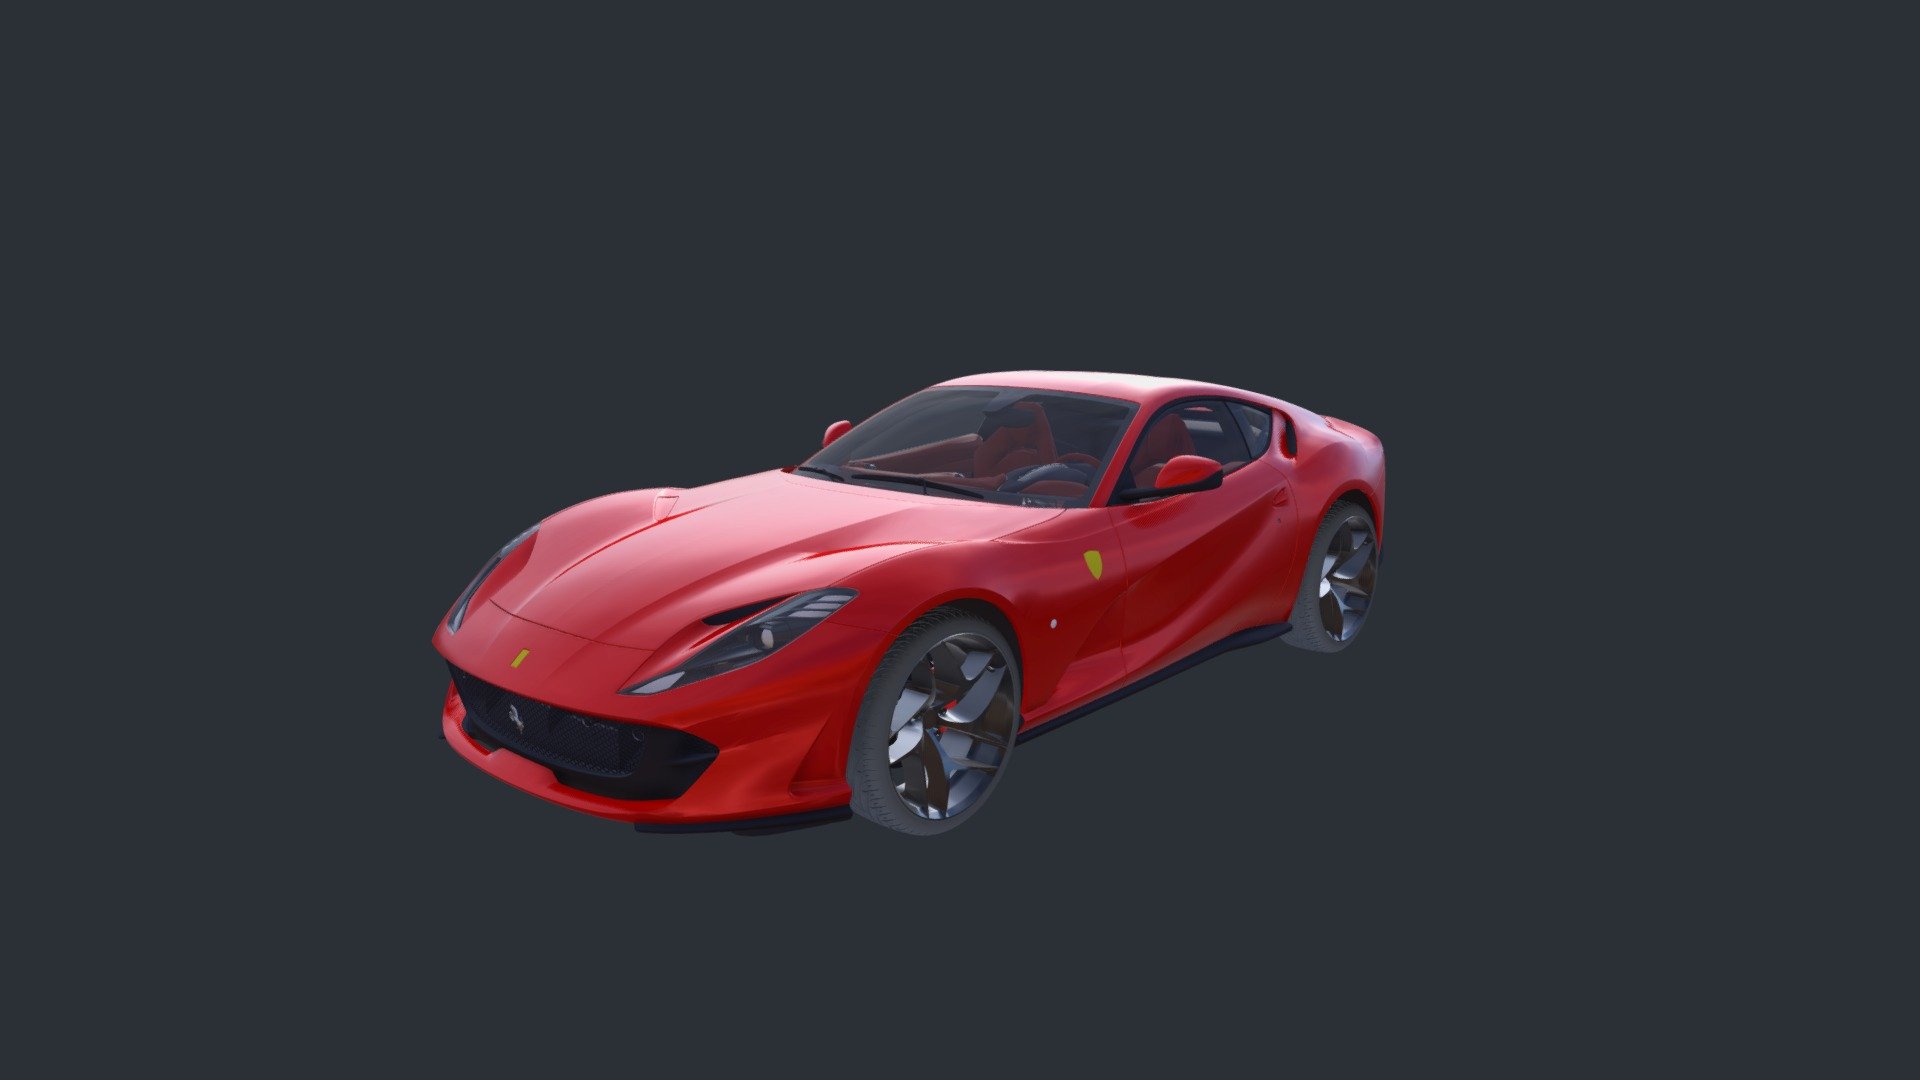 Ferrari 812 Superfast, with full interior, from the game Dimensional Drift. https://store.steampowered.com/app/1923770/Dimensional_Drift/
If you use this model, all I request is that you wishlist Dimensional Drift on steam.

Not animated, but it is game ready 3d model